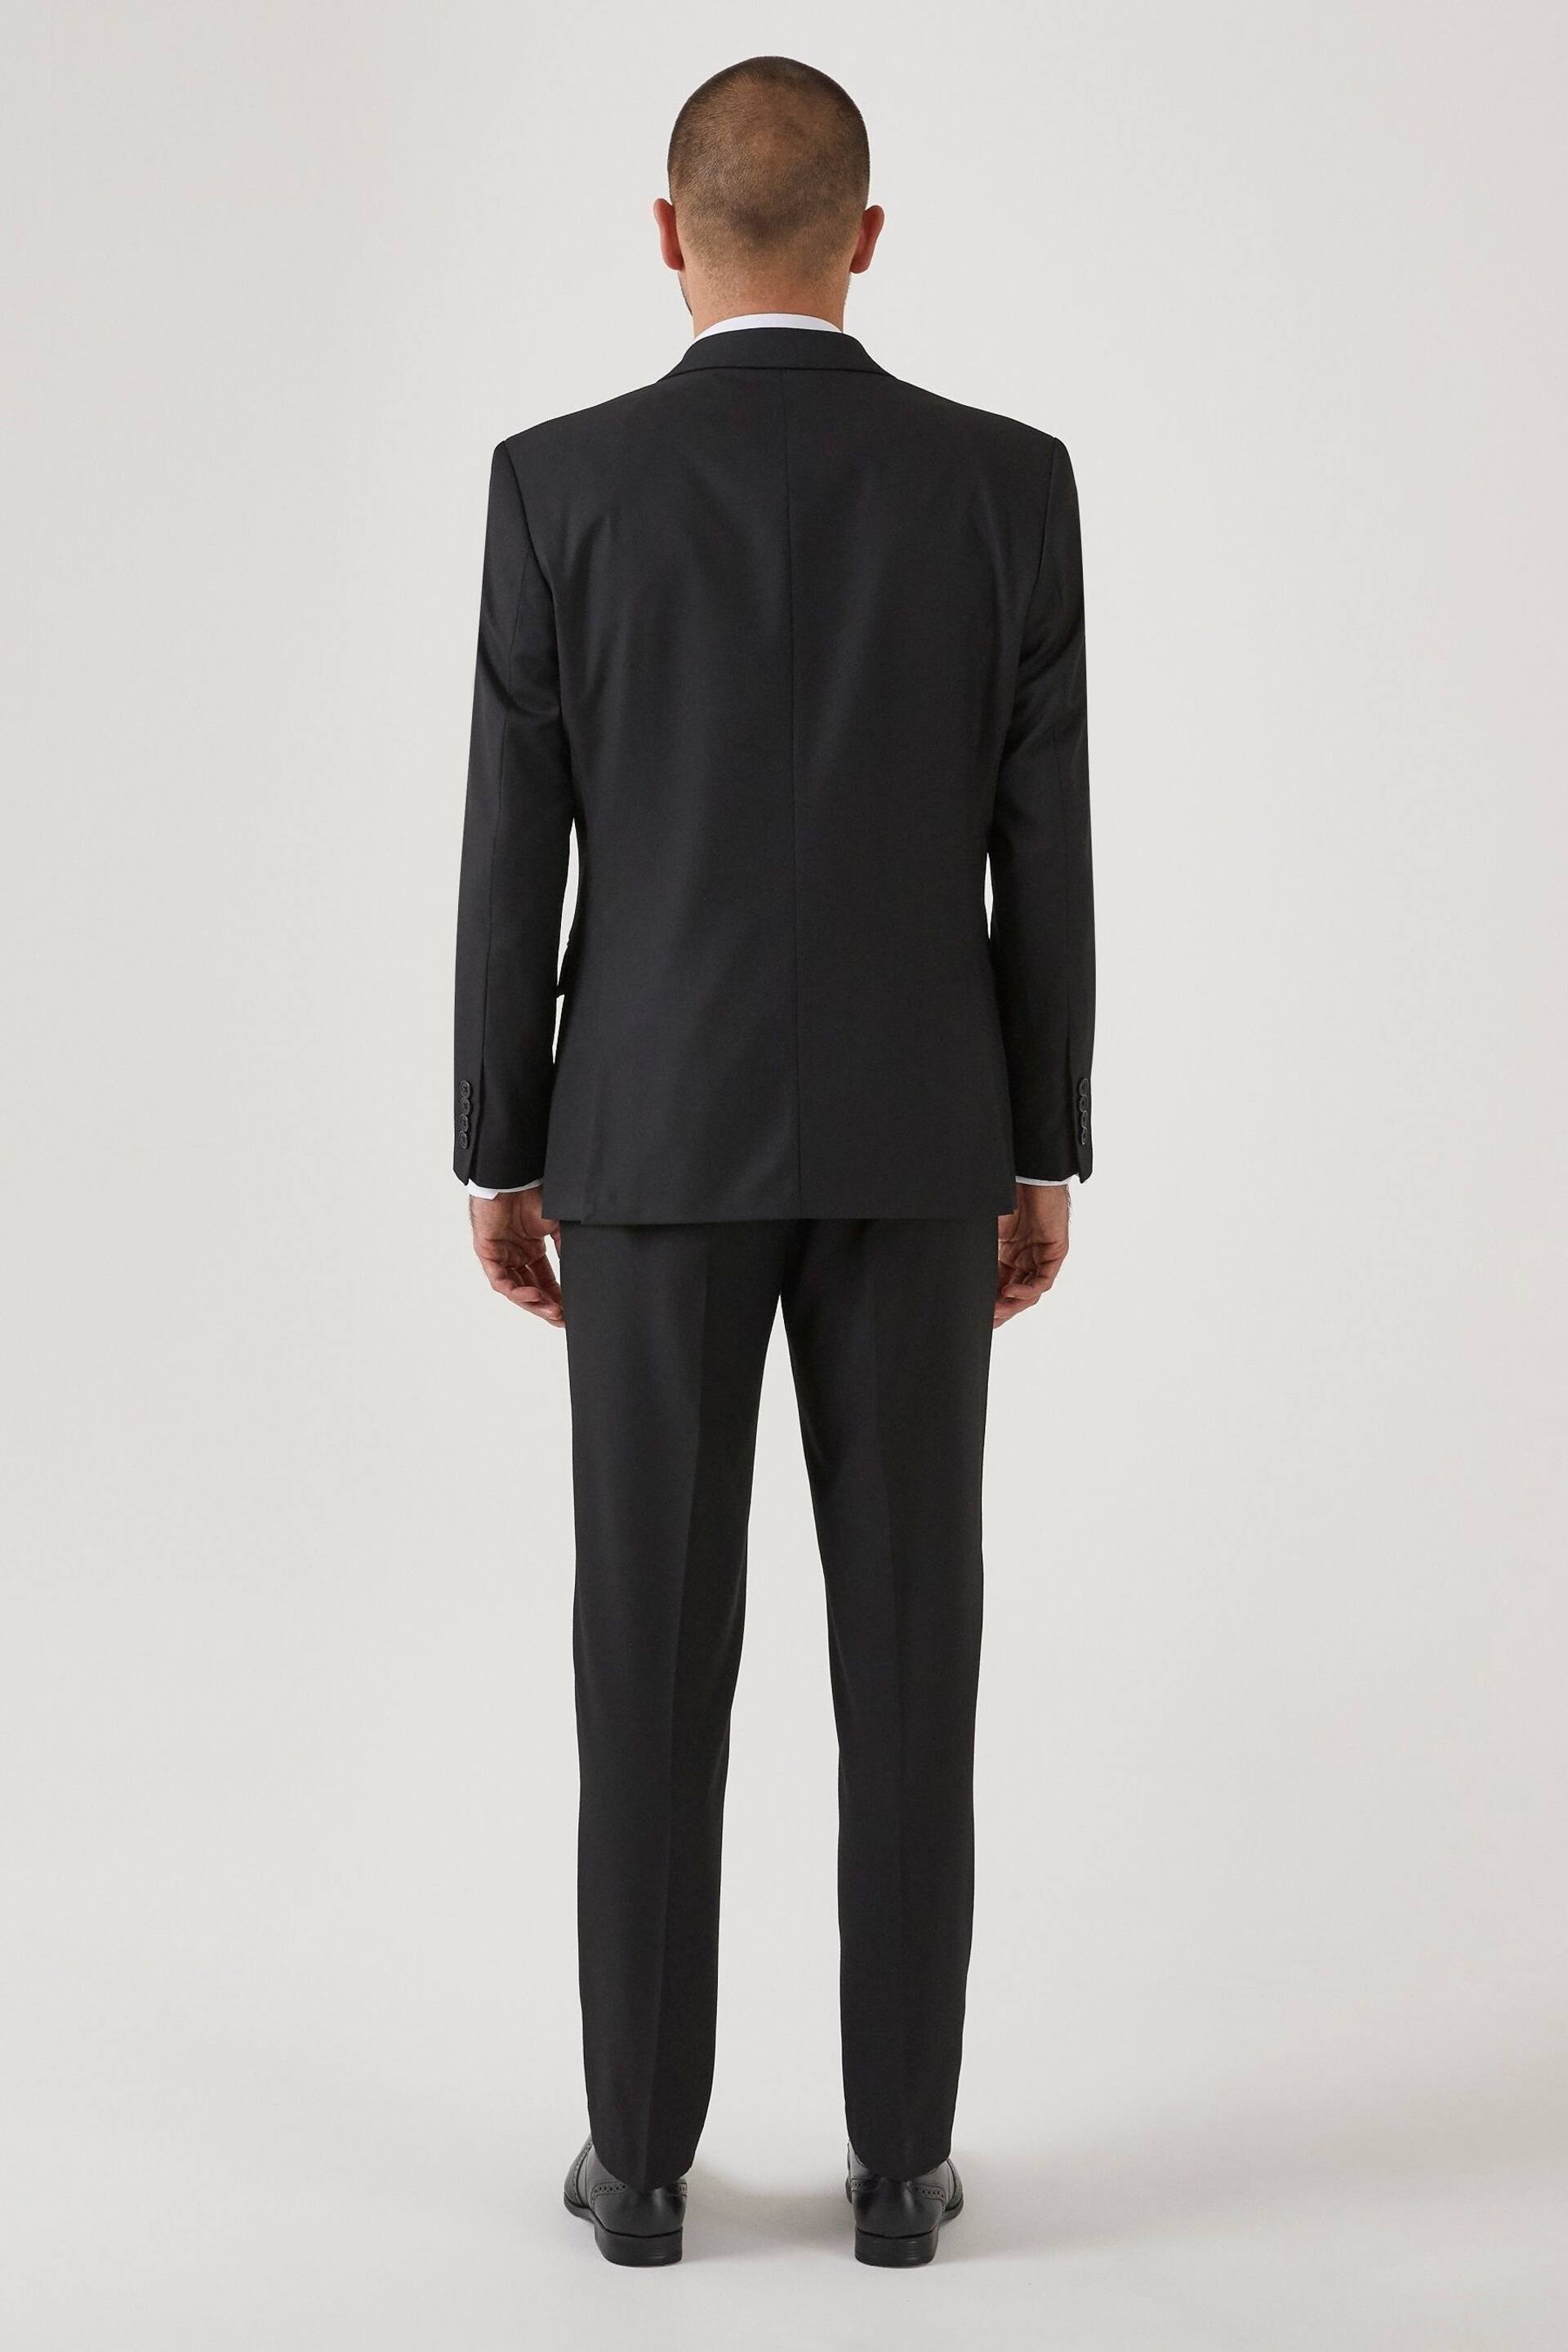 Skopes Romulus Tailored Fit Sustainable Suit Jacket - Image 3 of 5